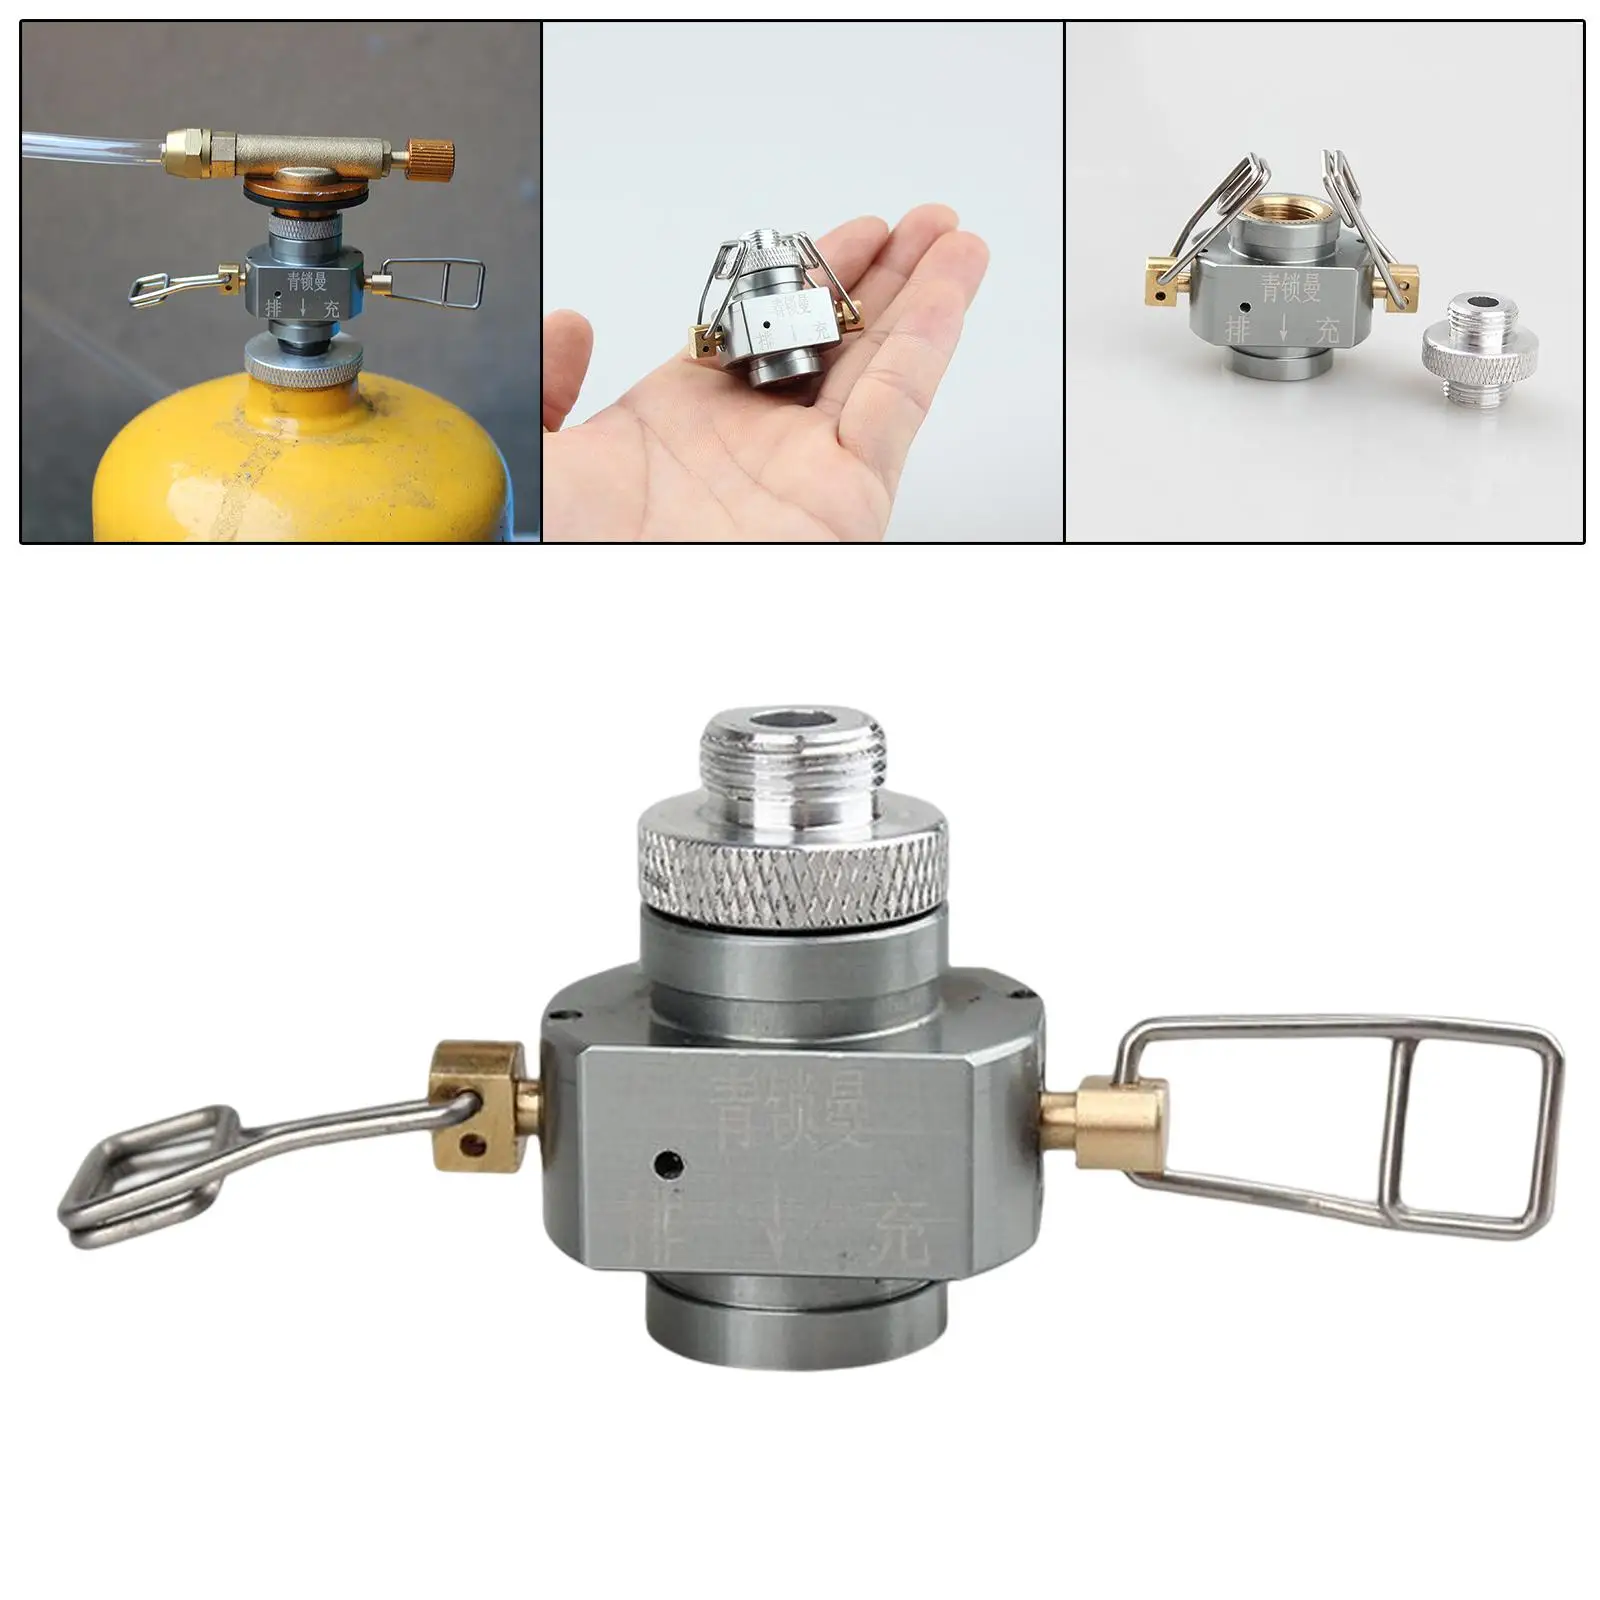 Portable Gas Refill Adapter Gas Canister Exchanger Valve Head Gas Tank Valve Gas Refill Adapter with Refilling Valve for Camping